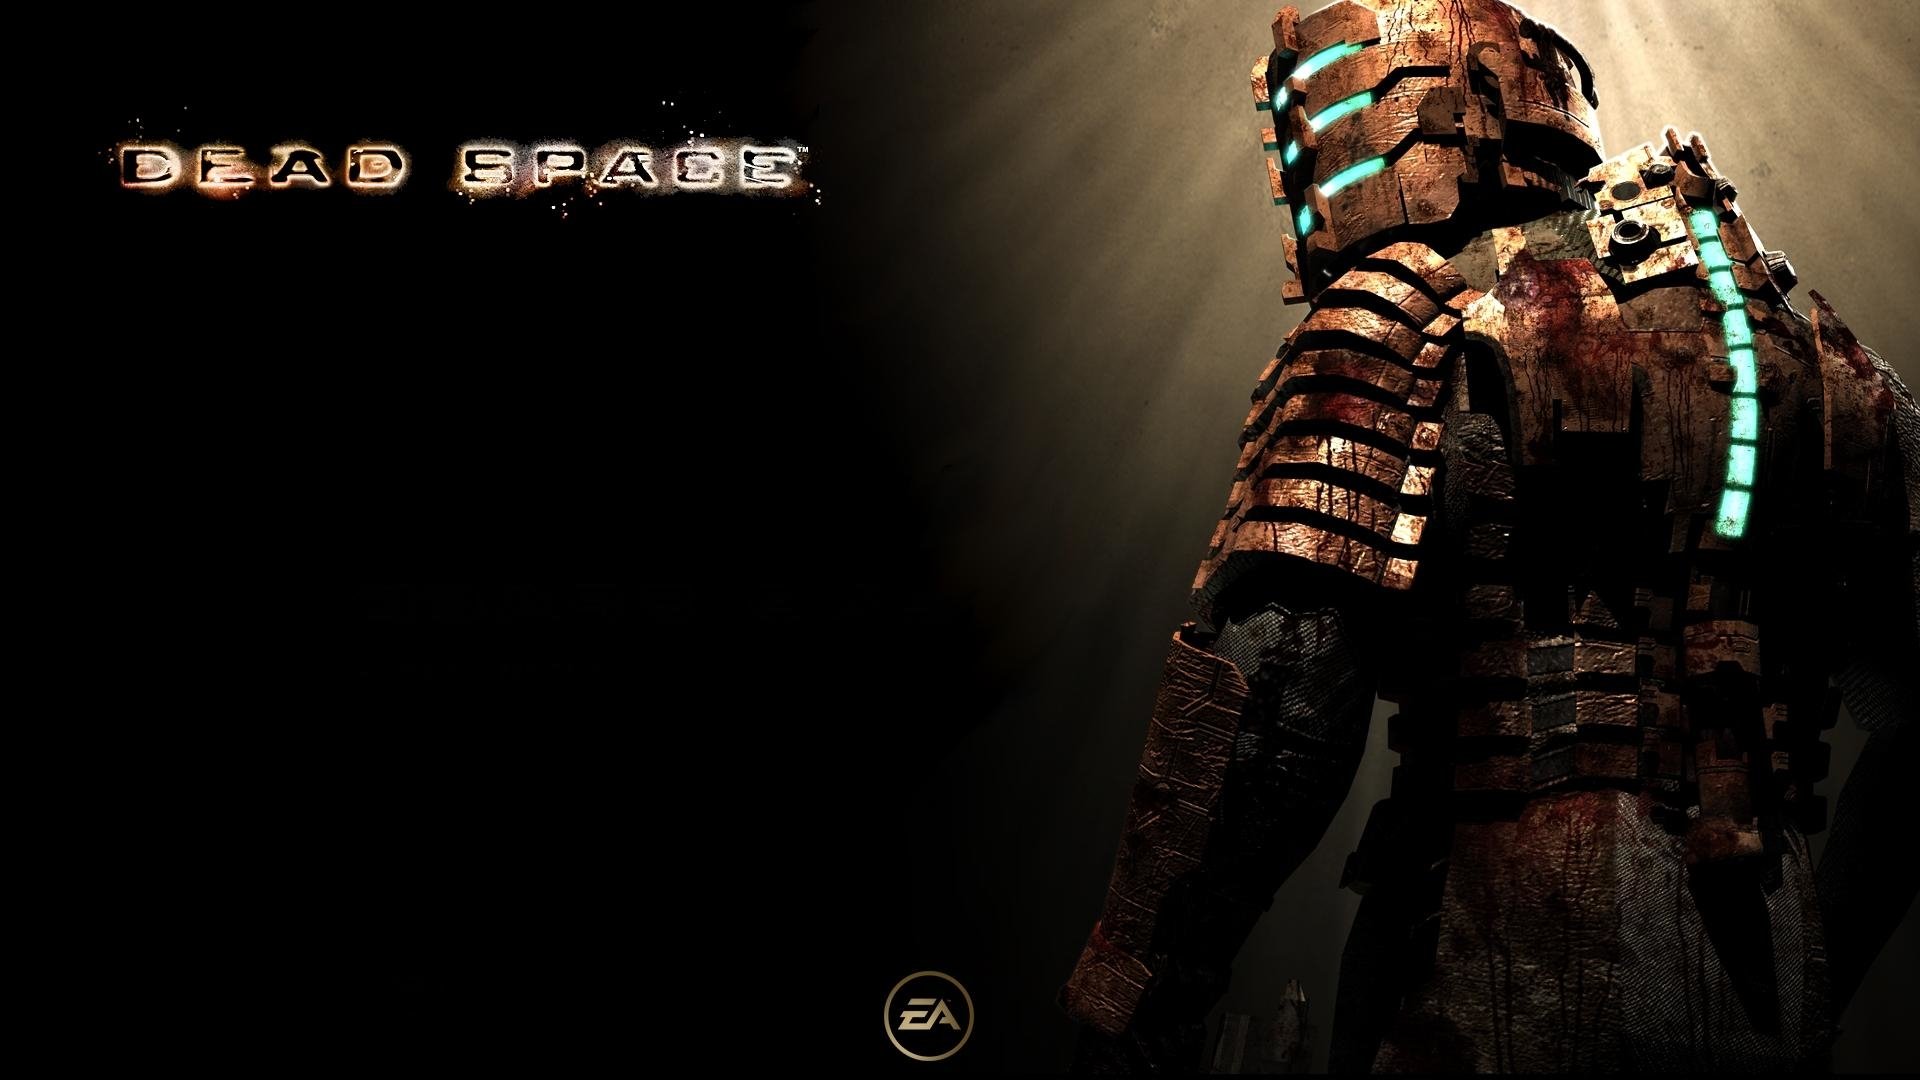 dead space wallpaper hd,cg artwork,action adventure game,action figure,digital compositing,fictional character